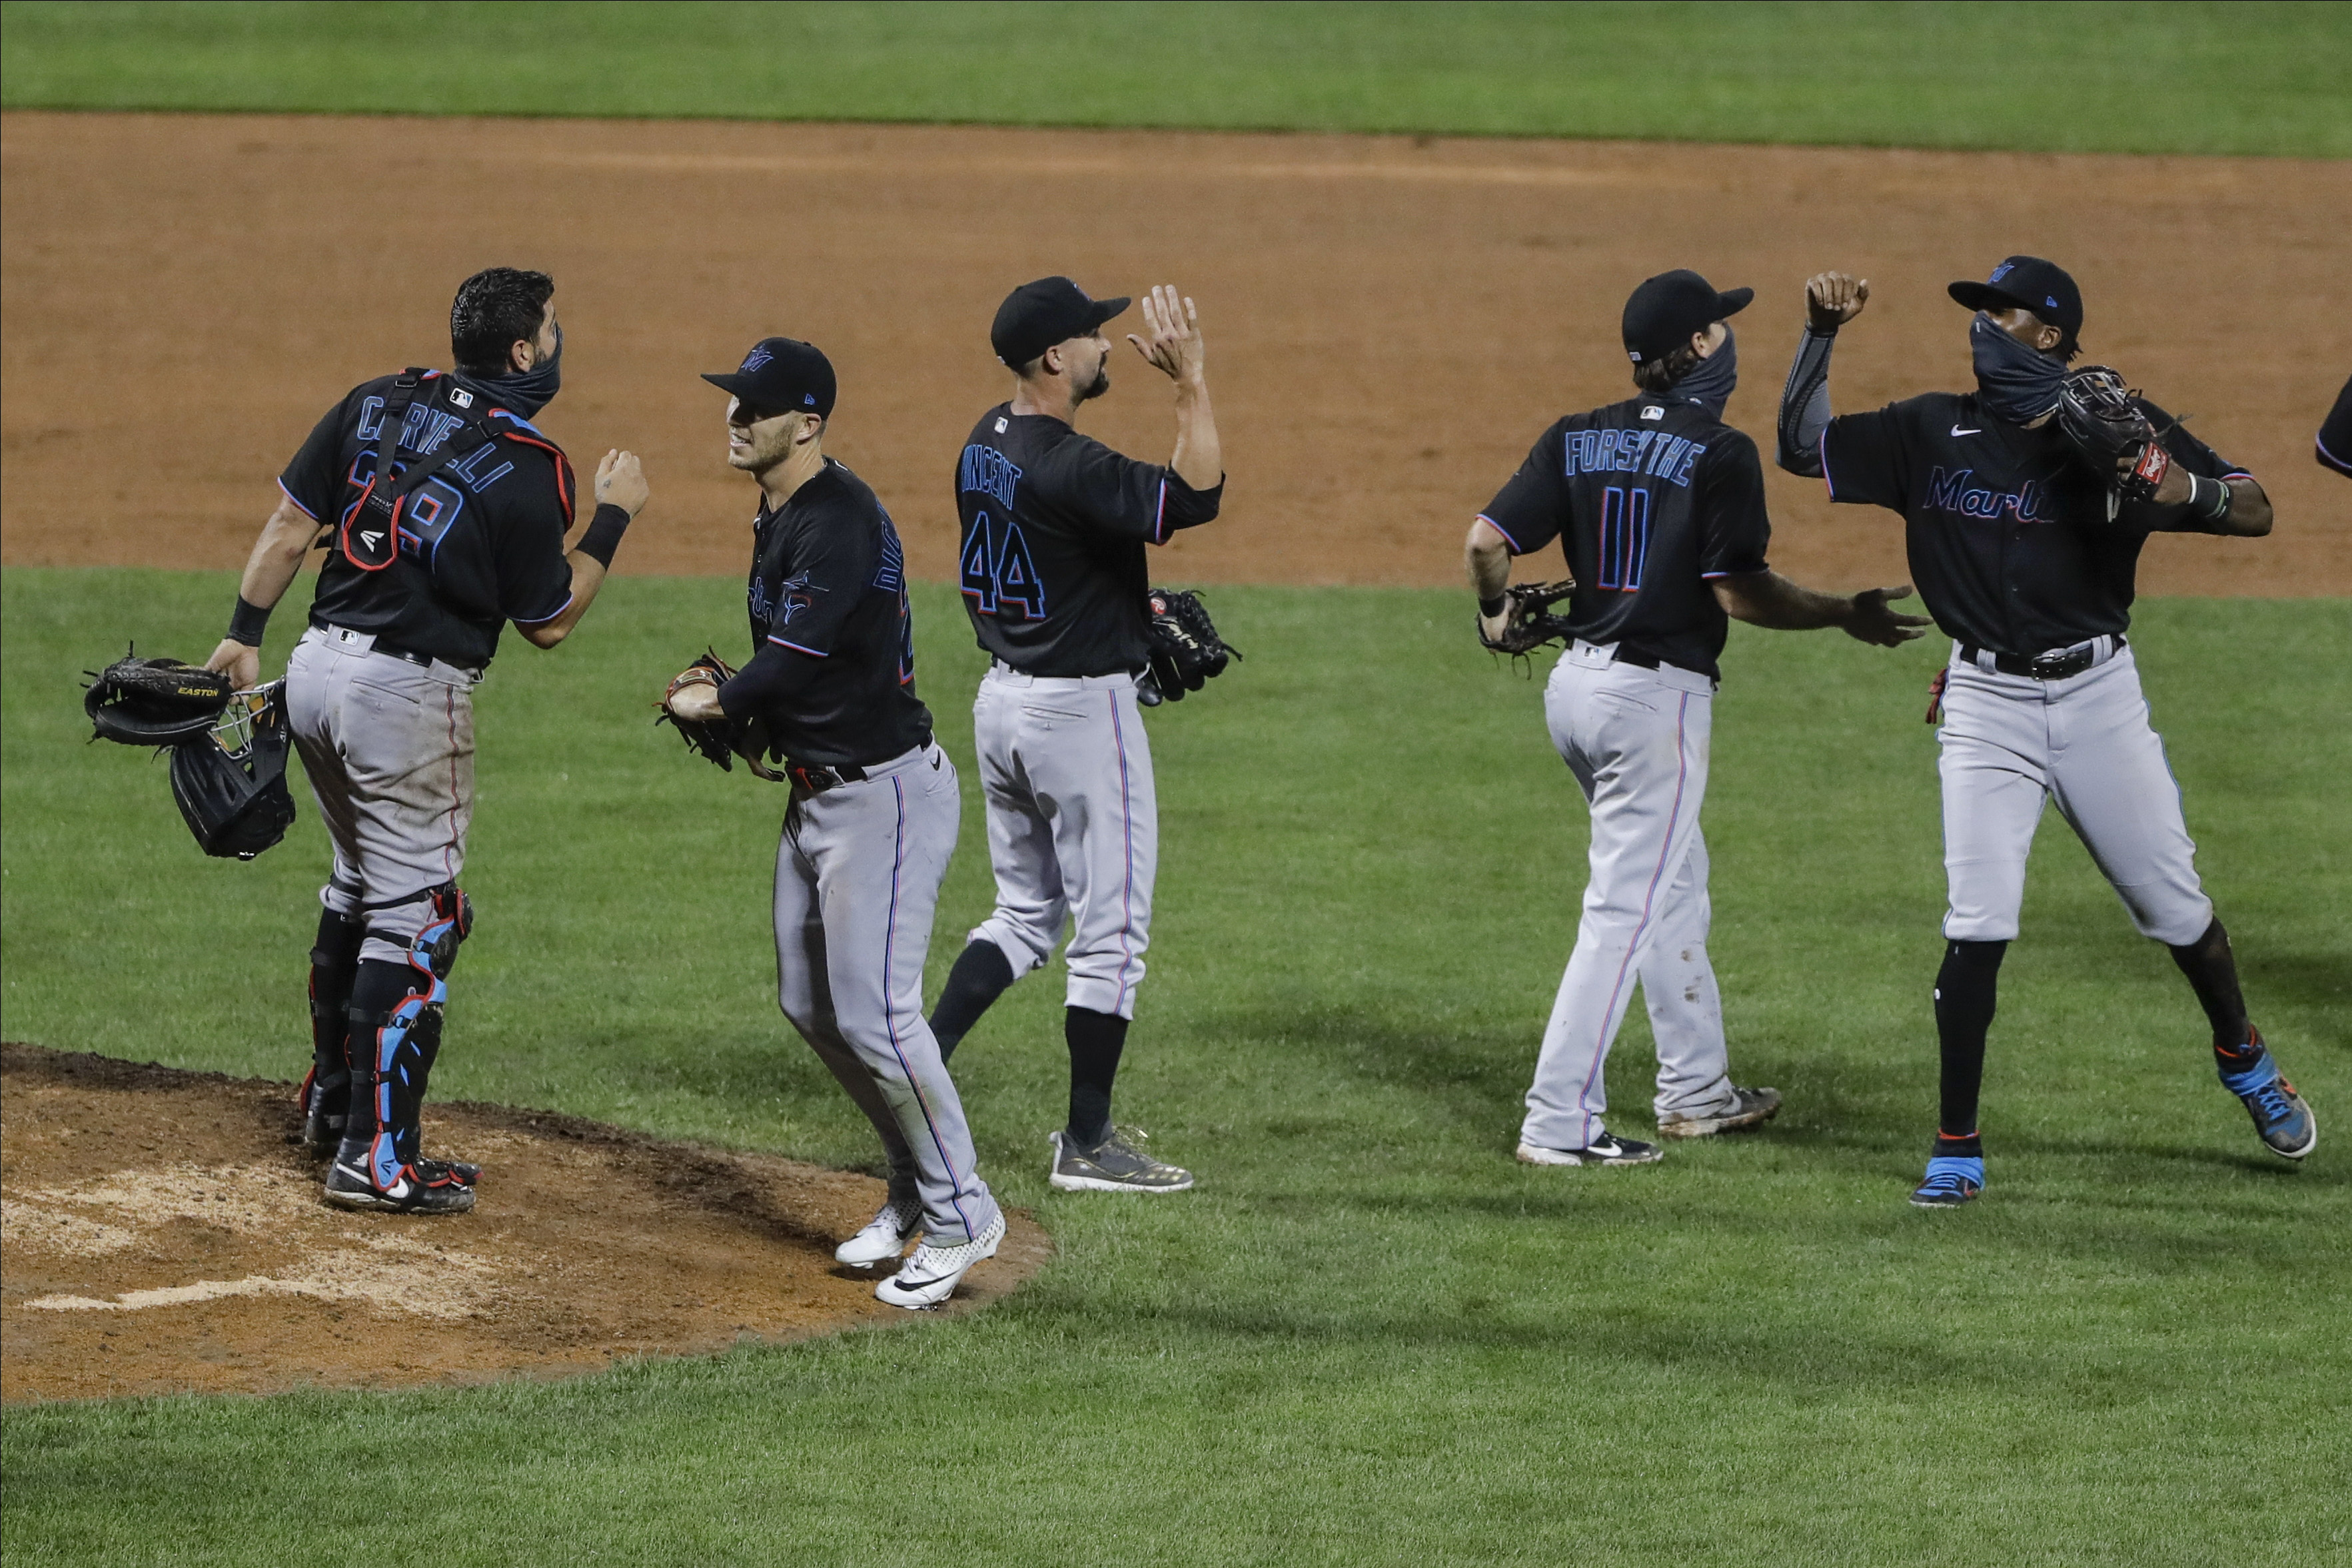 Surprising Marlins win again, top Mets 4-3 for 6th straight